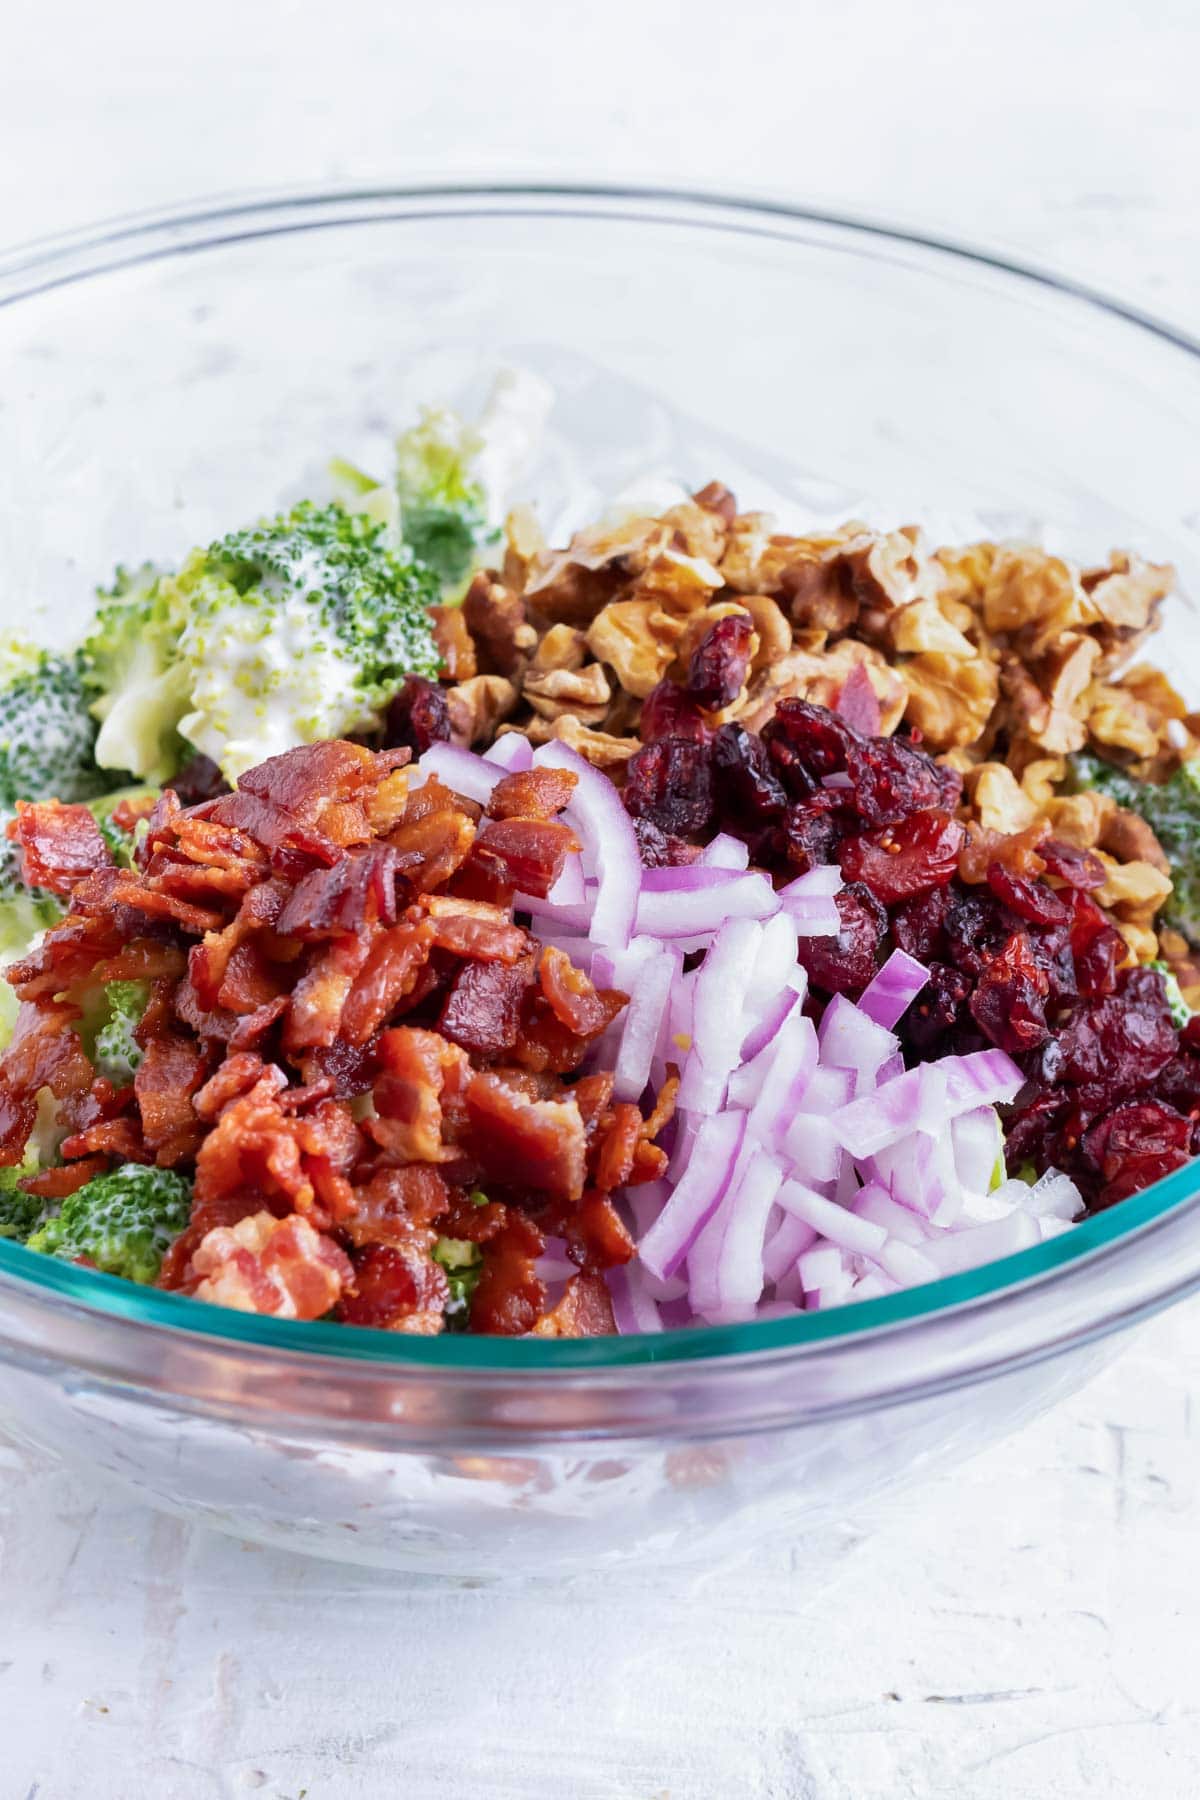 Combine colorful and healthy toppings in a broccoli salad.